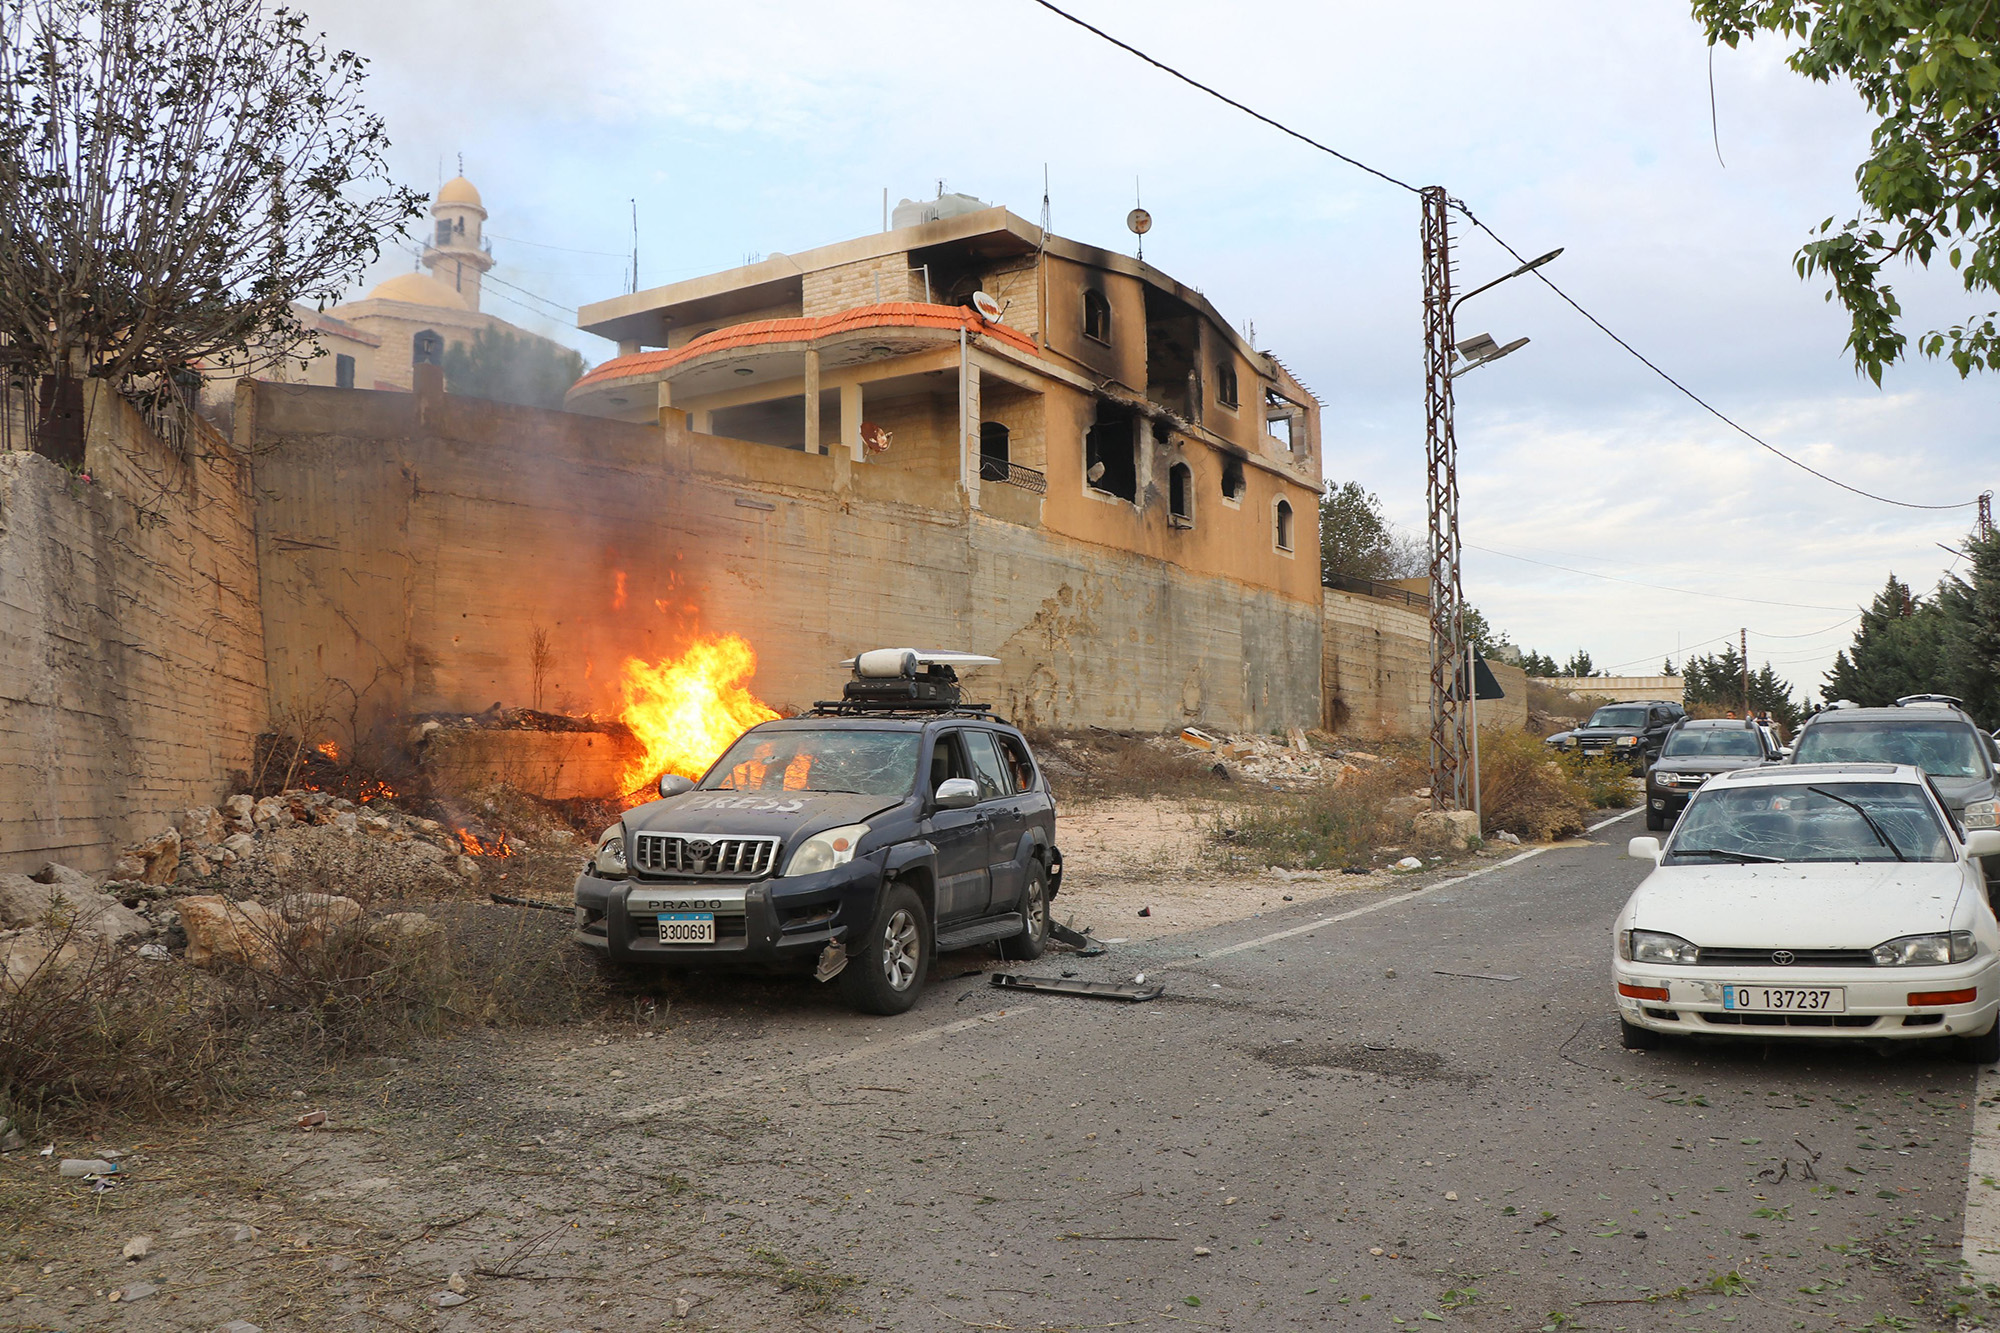 Flames erupt next to a press car following reported Israeli shelling in Lebanon's southern border village of Yaroun on November 13.